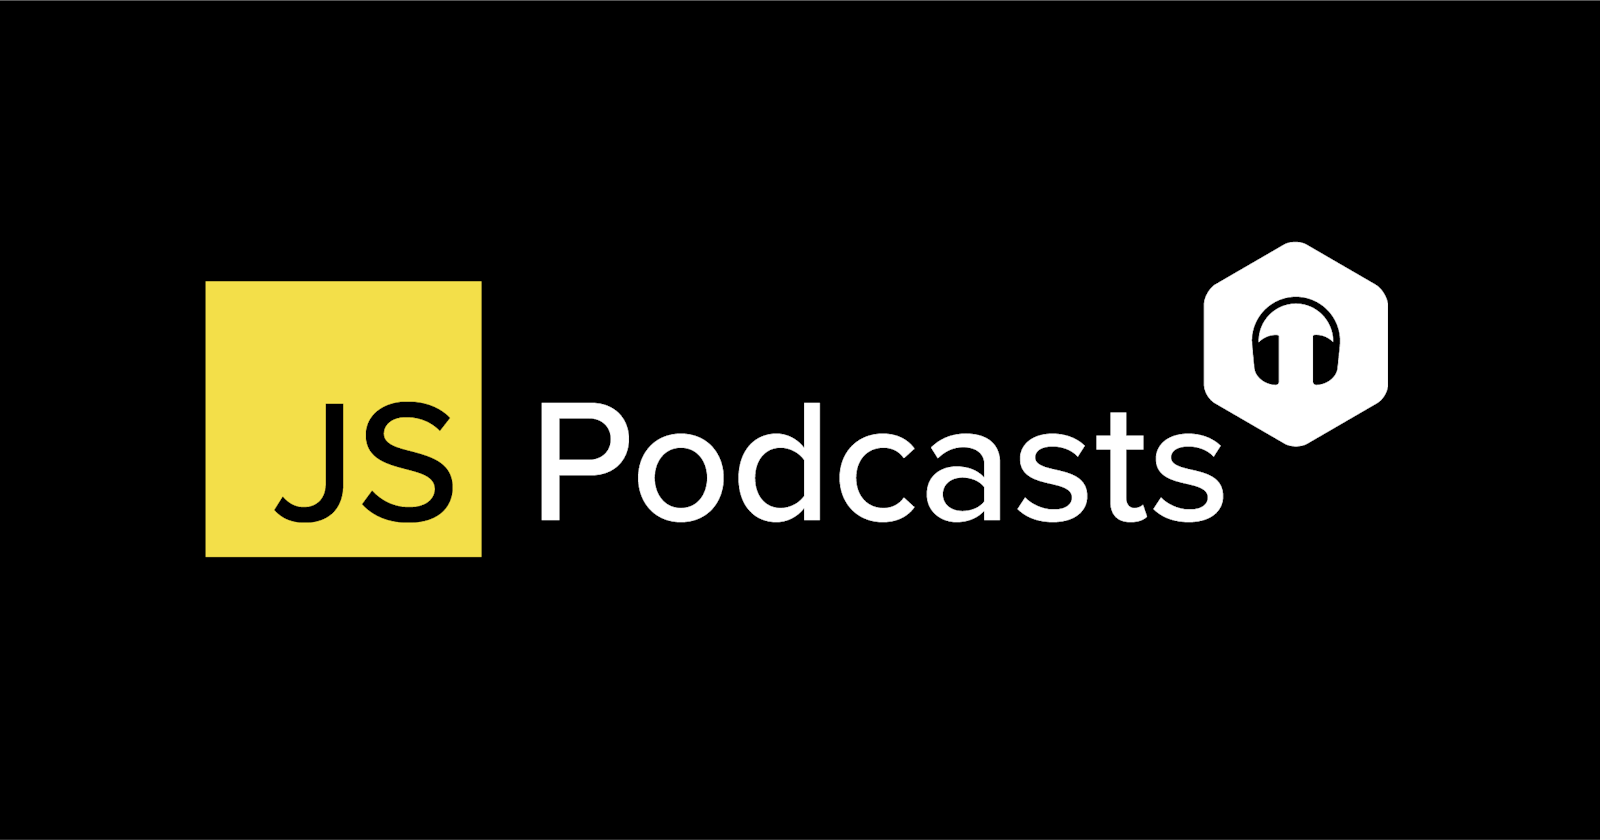 16 JavaScript Podcasts To Listen to in 2018